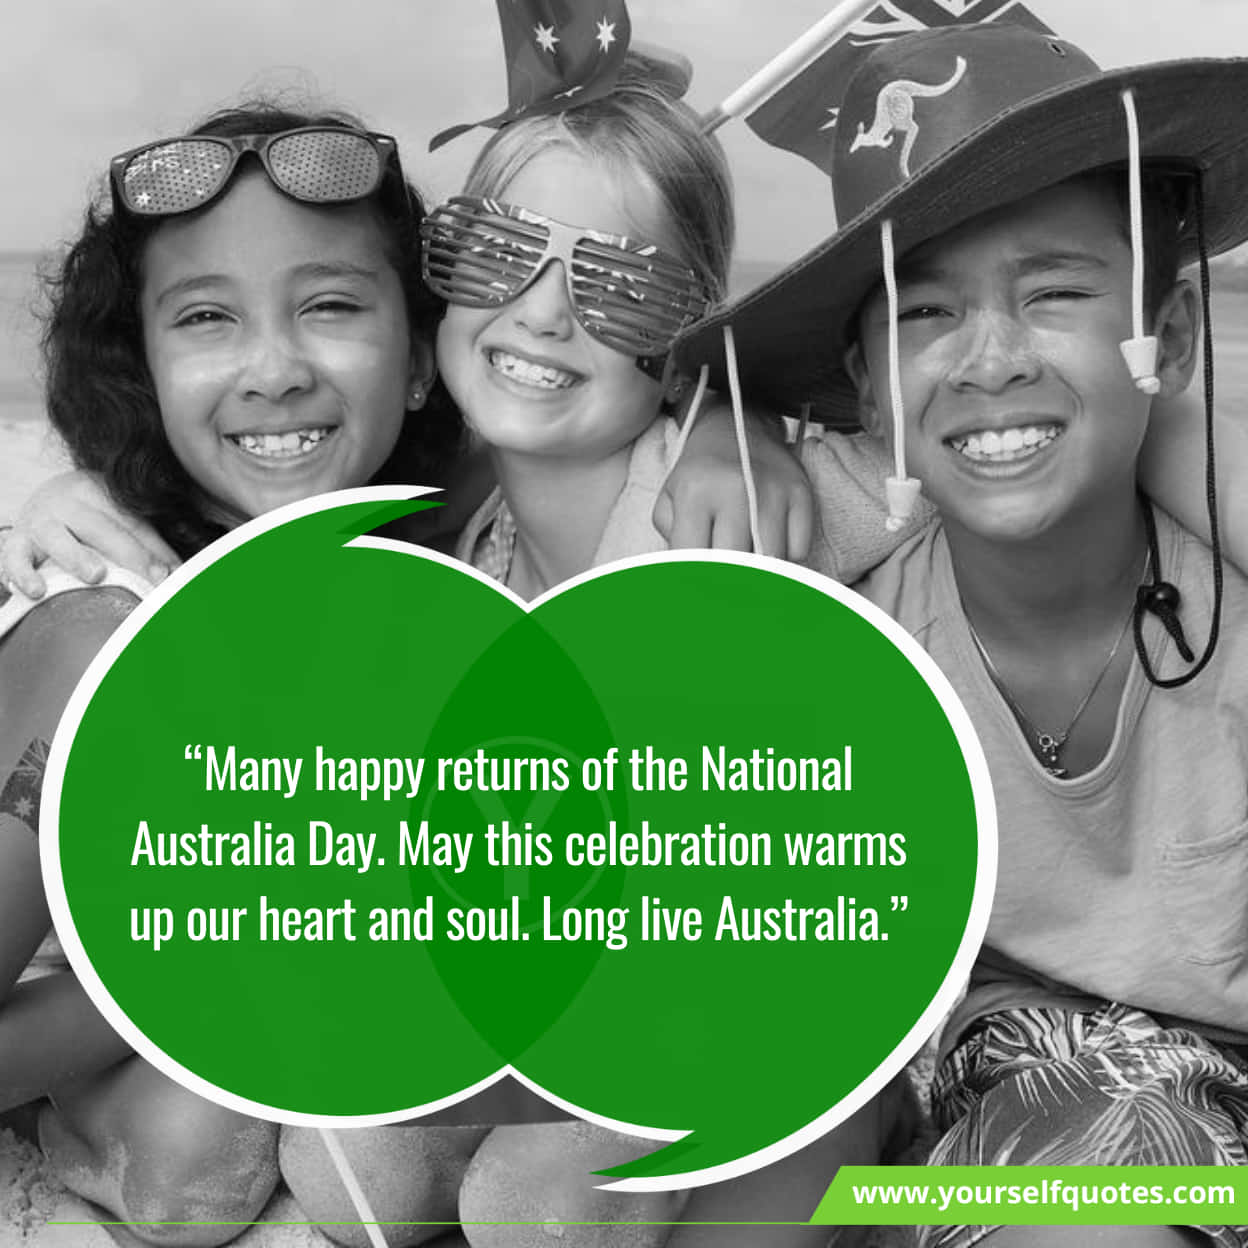 Australia Day Wishes To Share Loved Ones